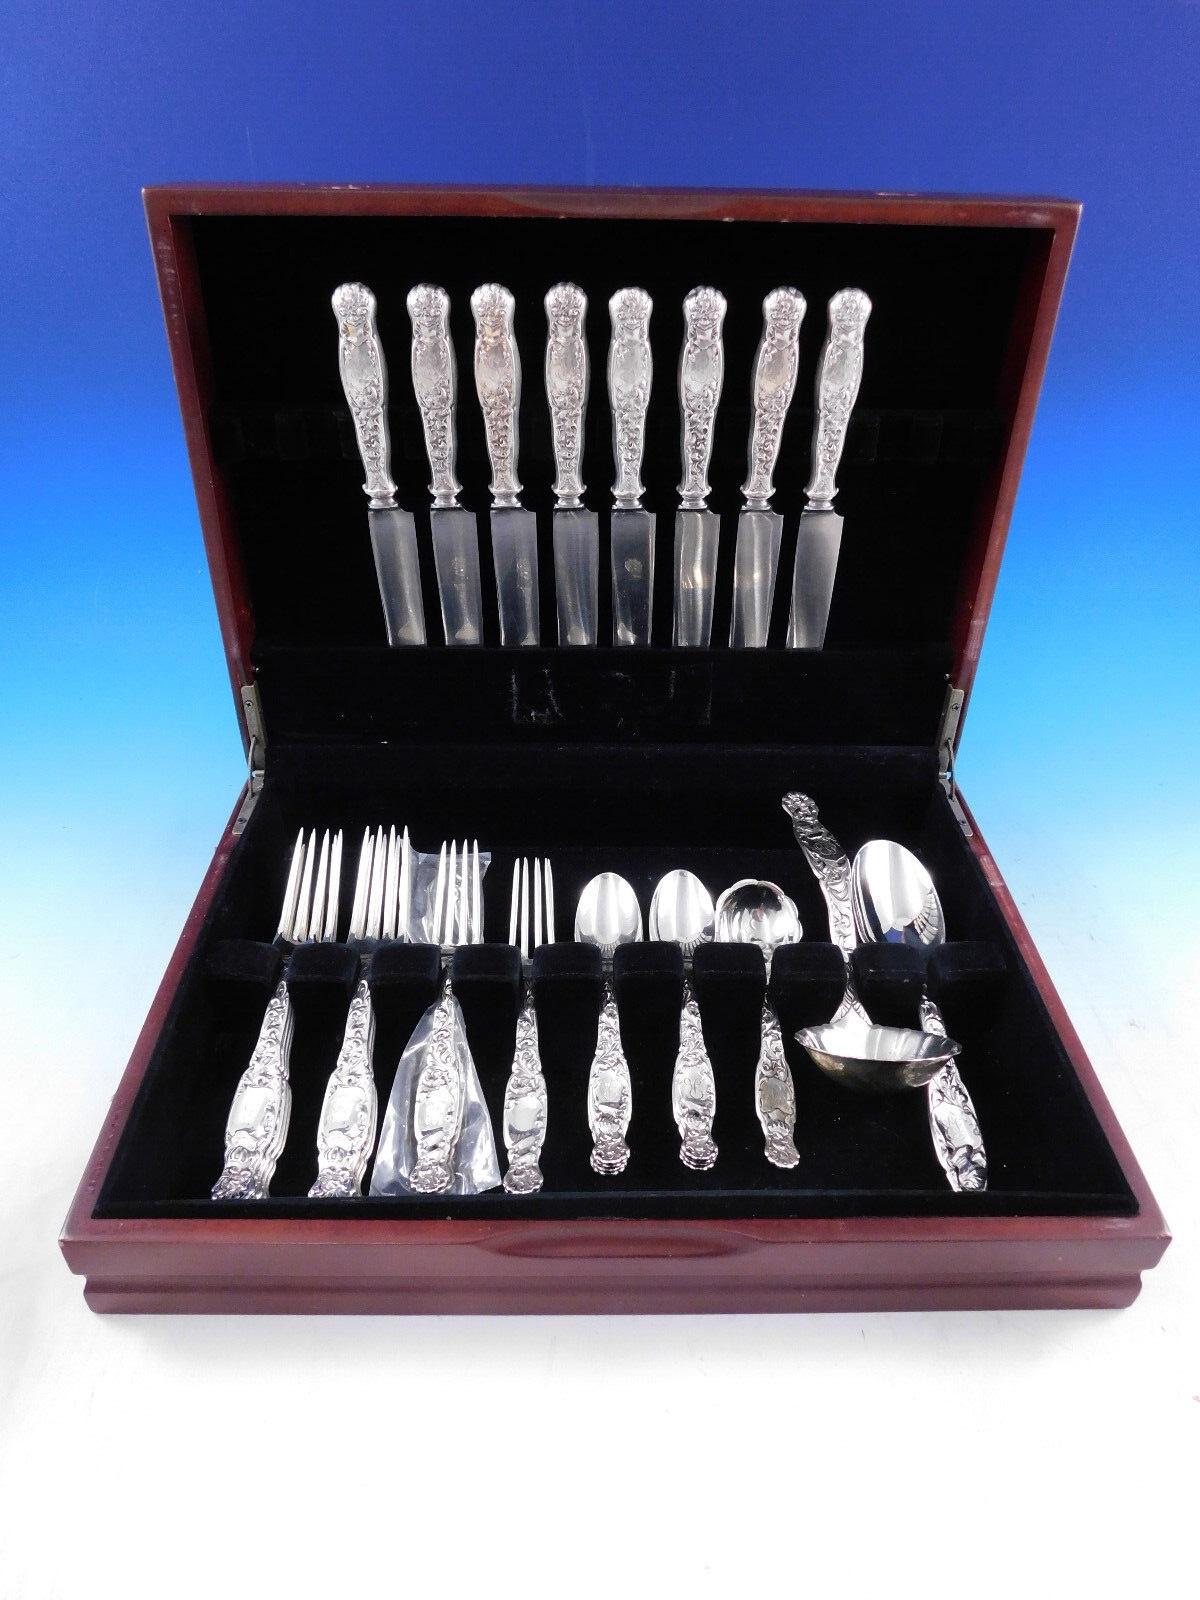 Heraldic by Whiting Sterling Silver Flatware set - 40 pieces. This set includes:

8 Knives, with stainless blades, 9